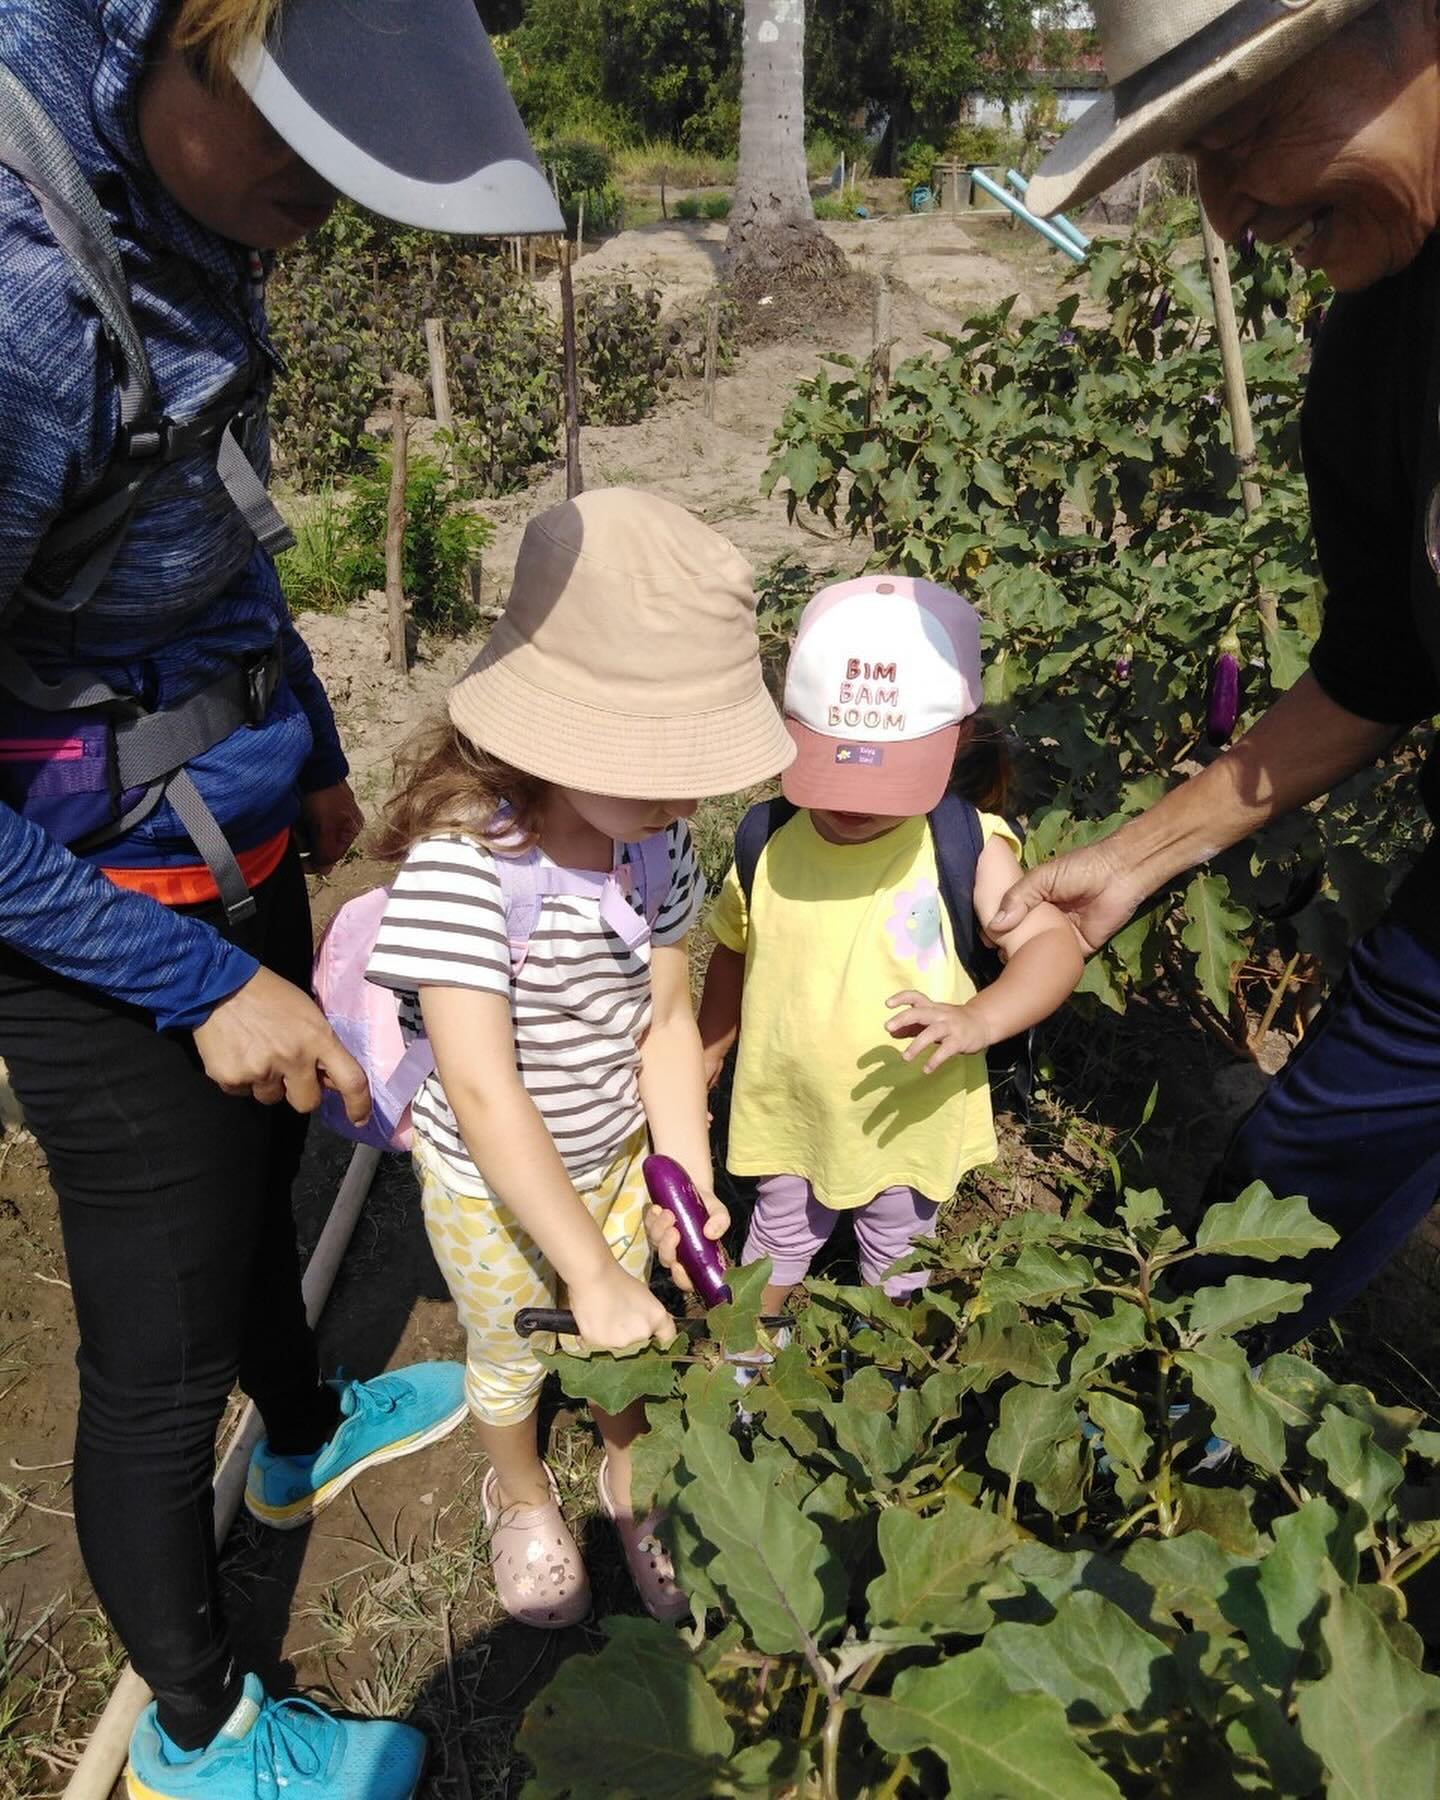 Farm to table field trip.
We had a wonderful experience going to a lovely local organic farm just down the road, we saw how eggplant, okra, sugar cane, cucumber, green beans and basil grow. The children were fascinated by the beautiful flowers that t